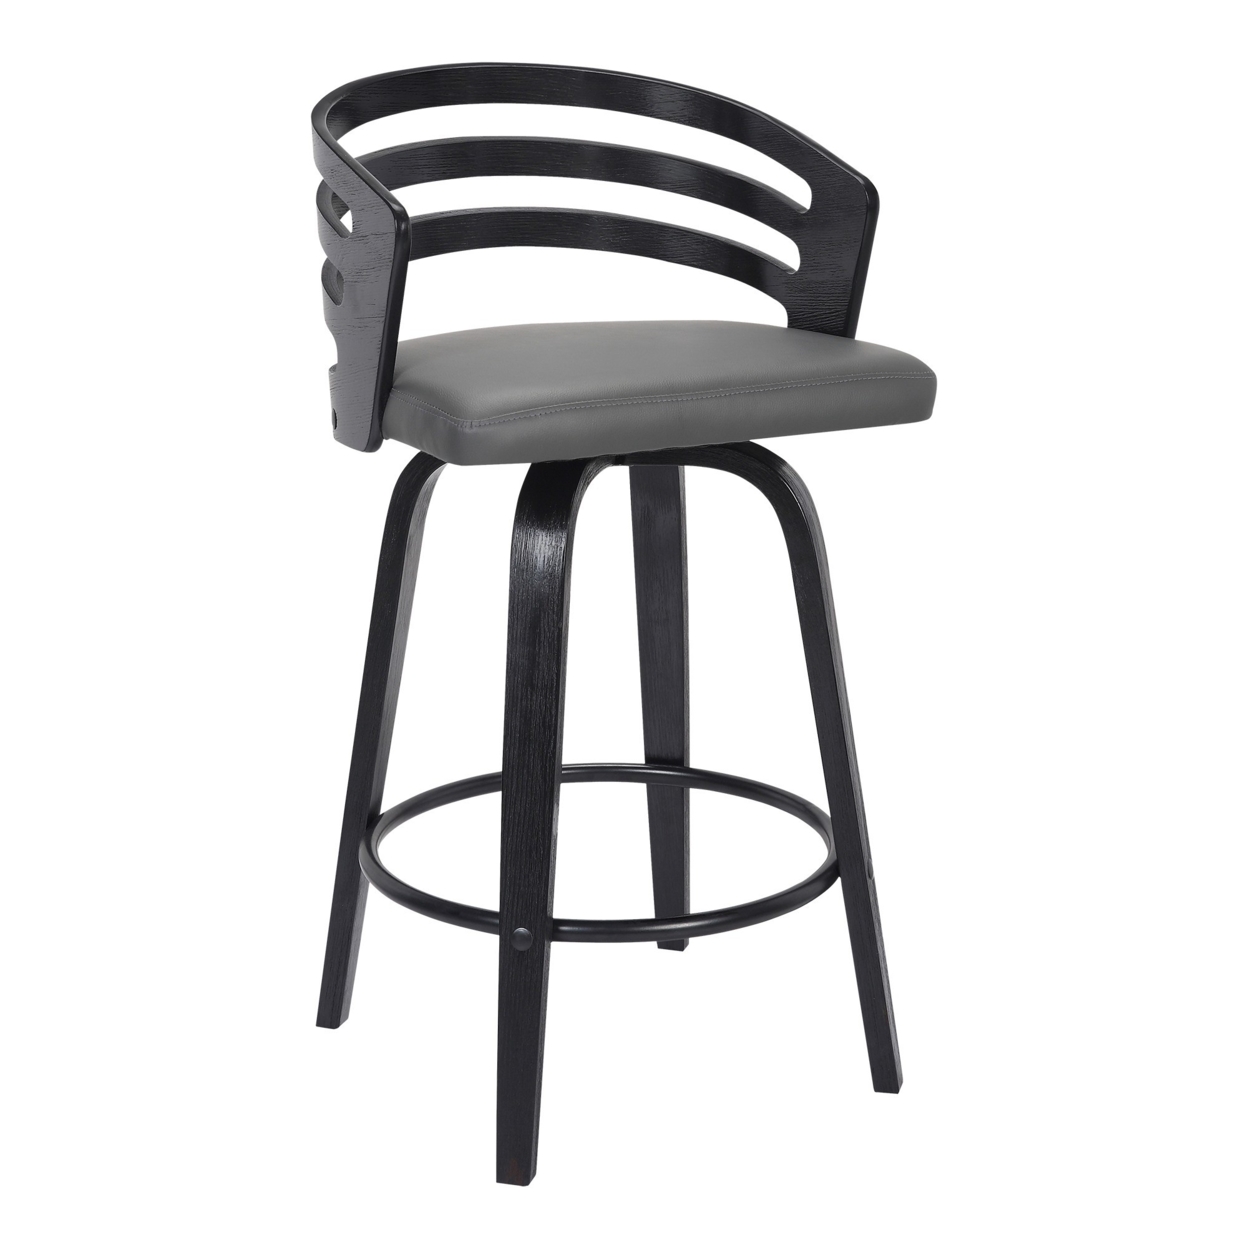 30 Inch Wooden And Leatherette Swivel Barstool, Gray And Black- Saltoro Sherpi